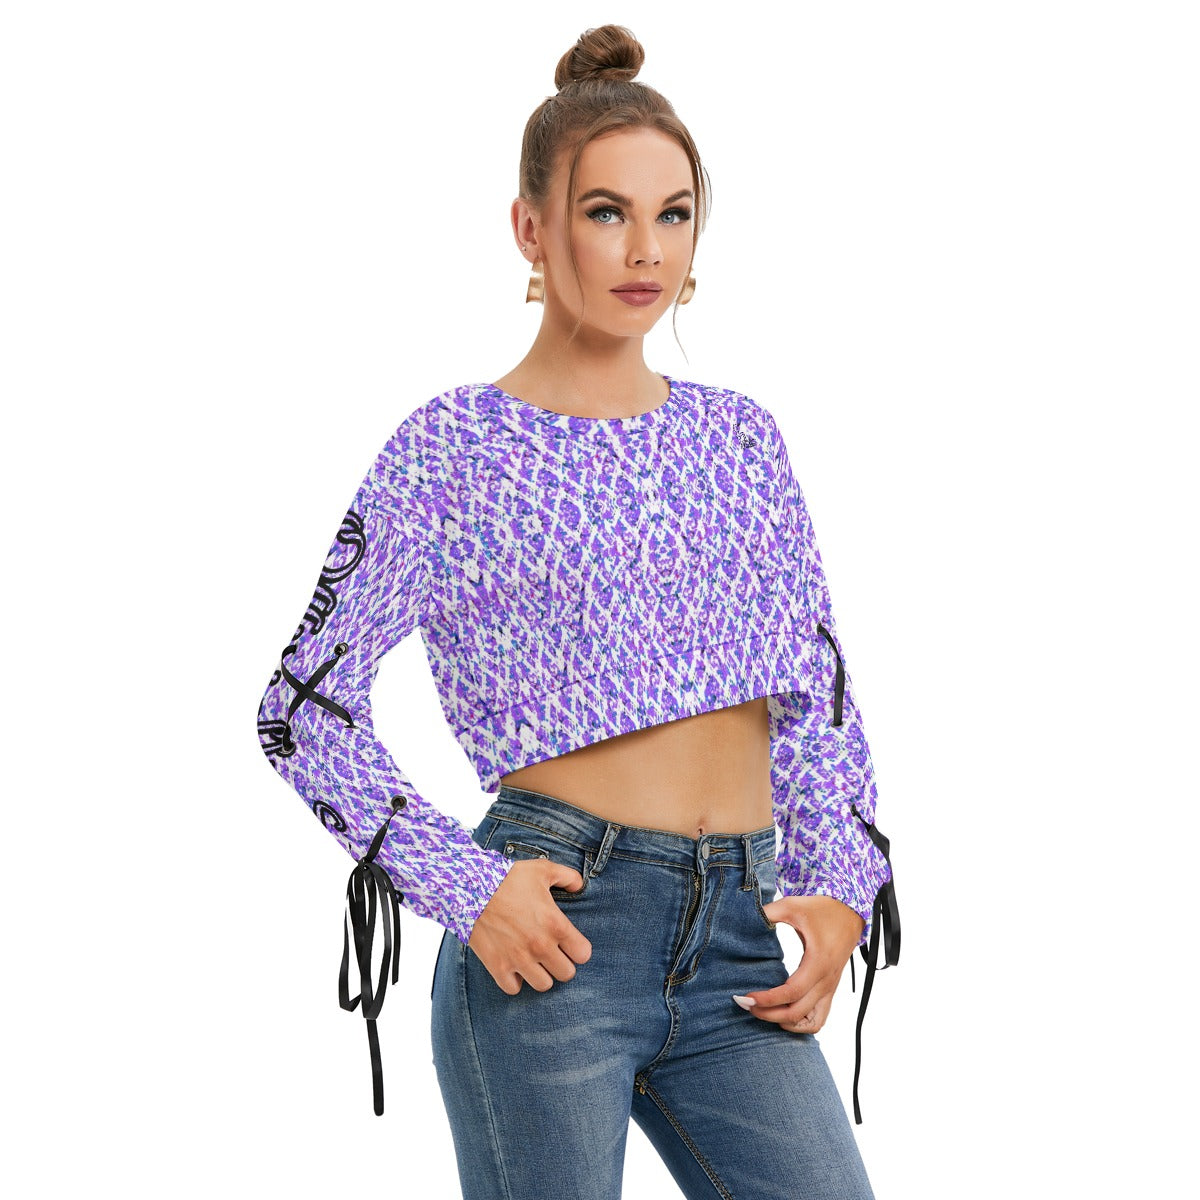 Officially Sexy Purple Stitched FHC Women's Long Sleeve Cropped Sweatshirt With Lace up Sleeves Right